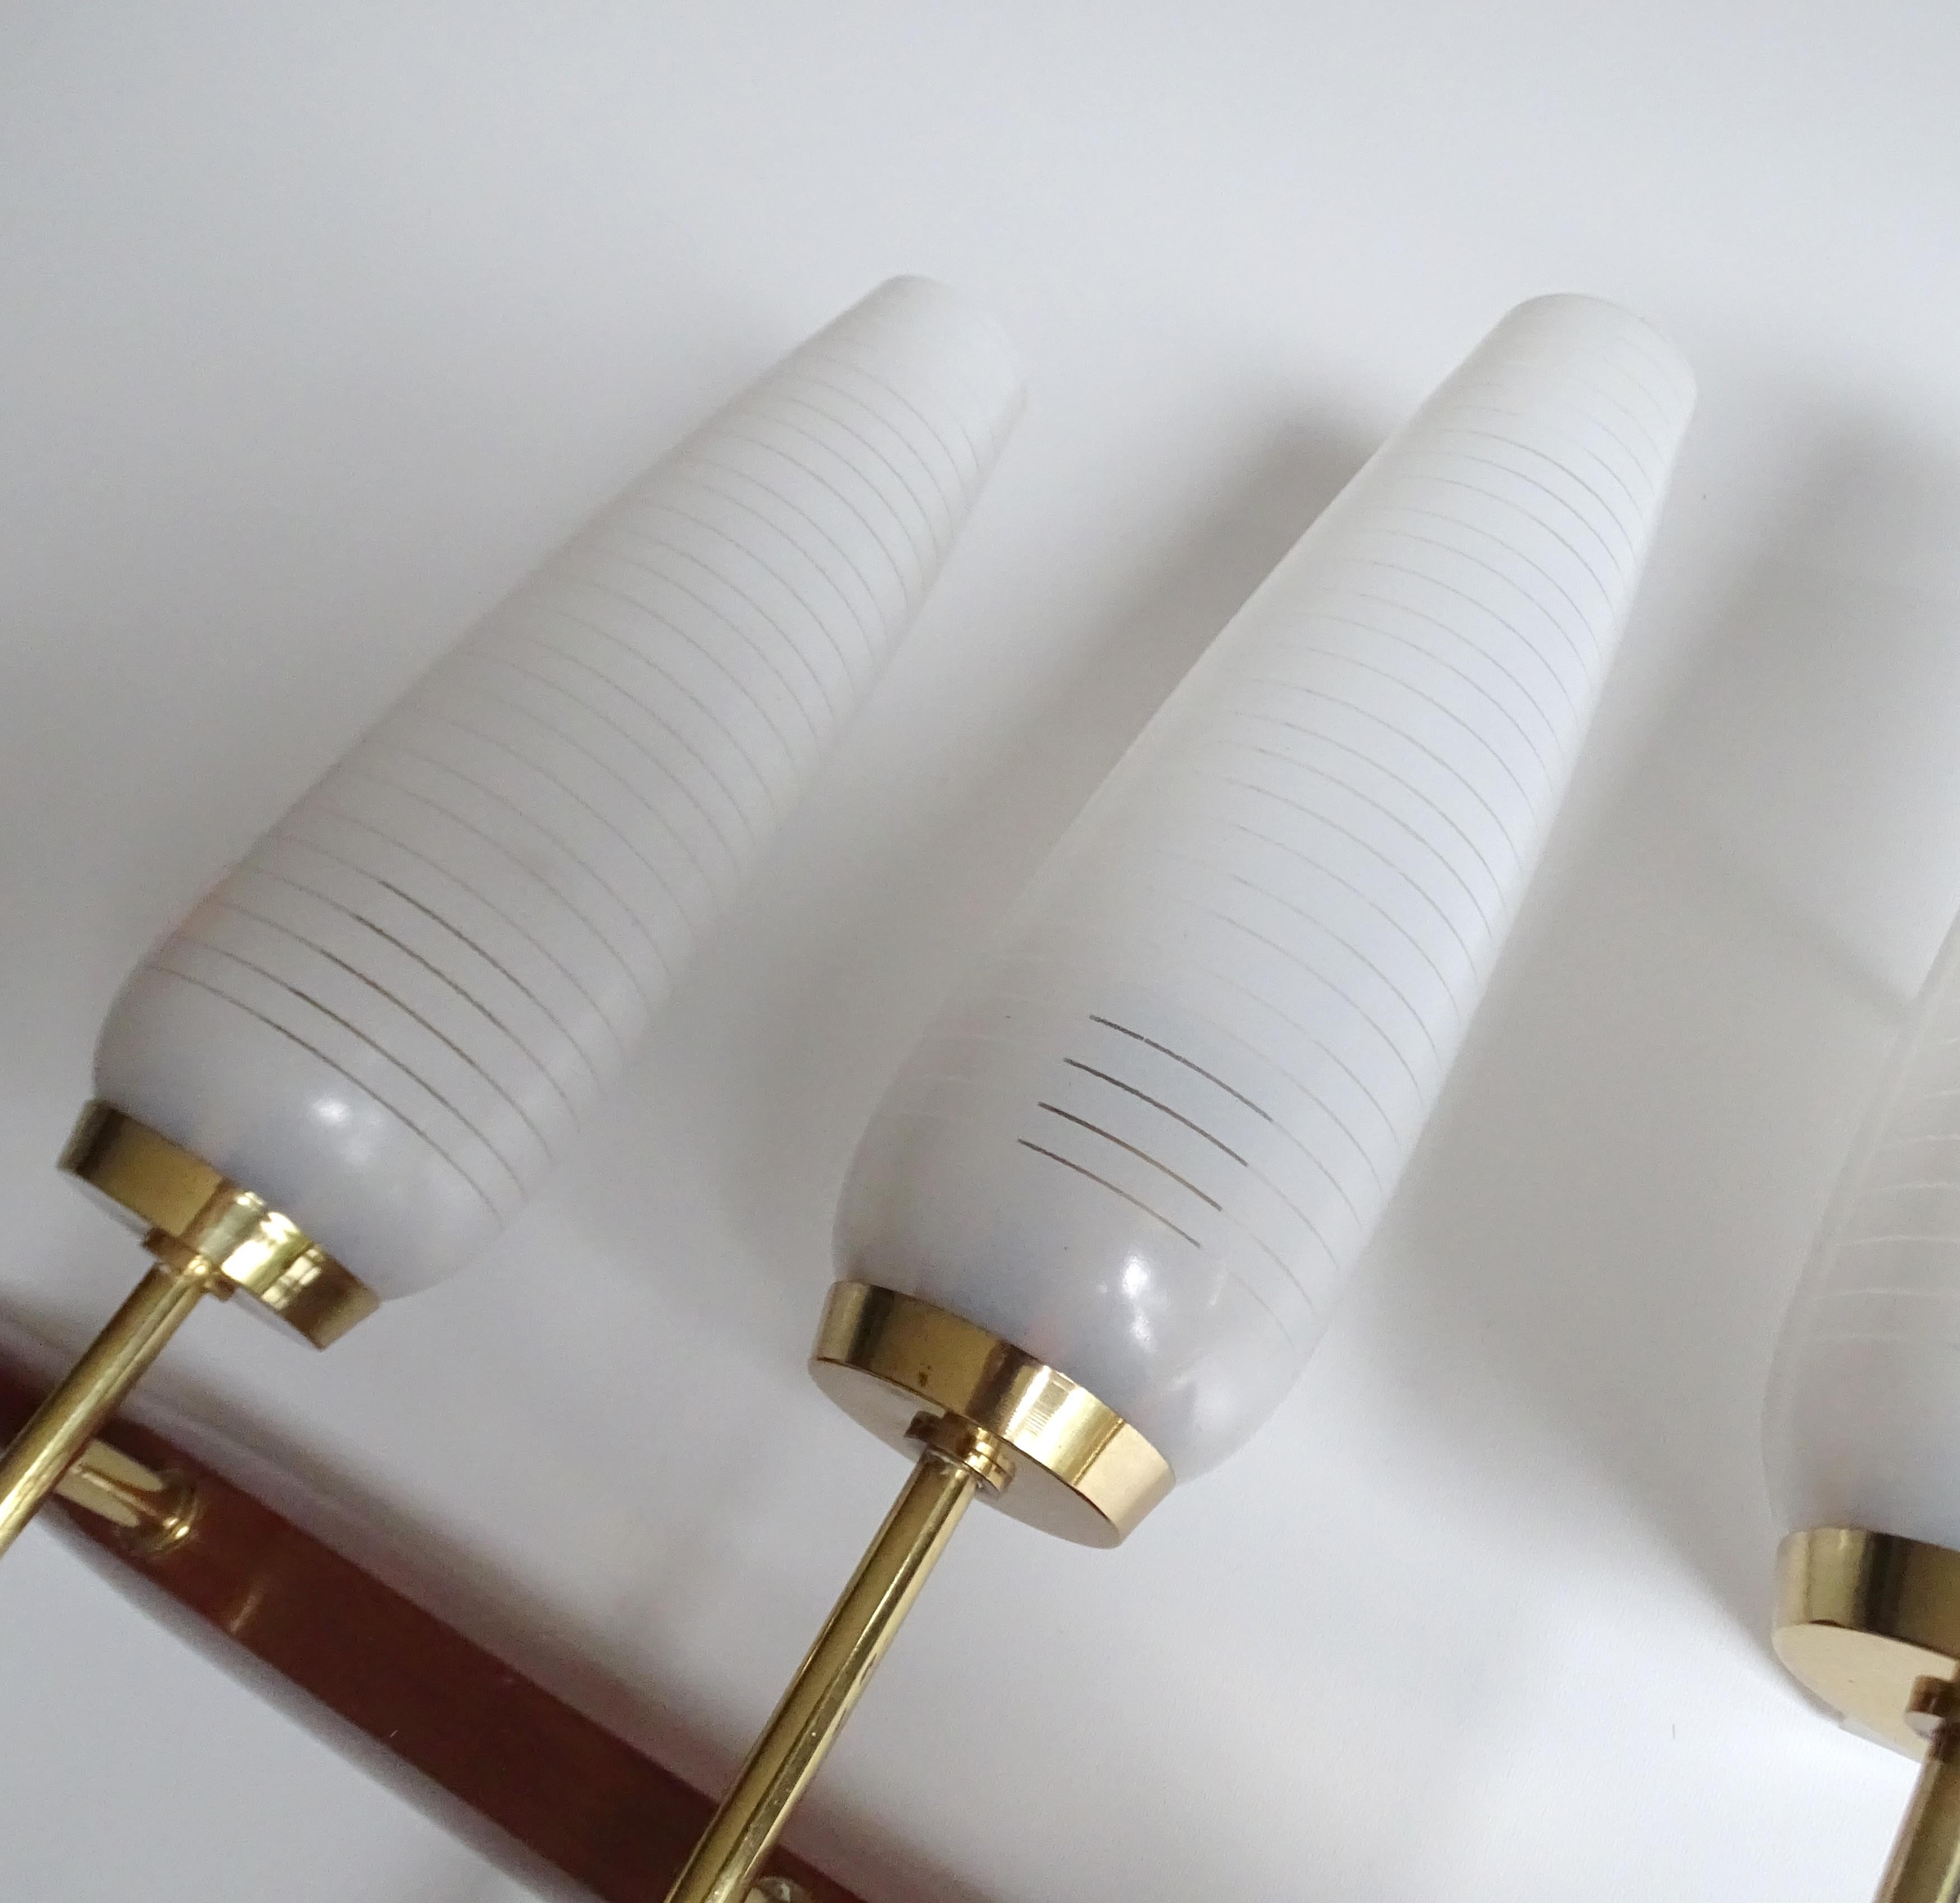  Pair of  French Mid Century Sconces, Maison Arlus, 1960s Danish Modern Style For Sale 7